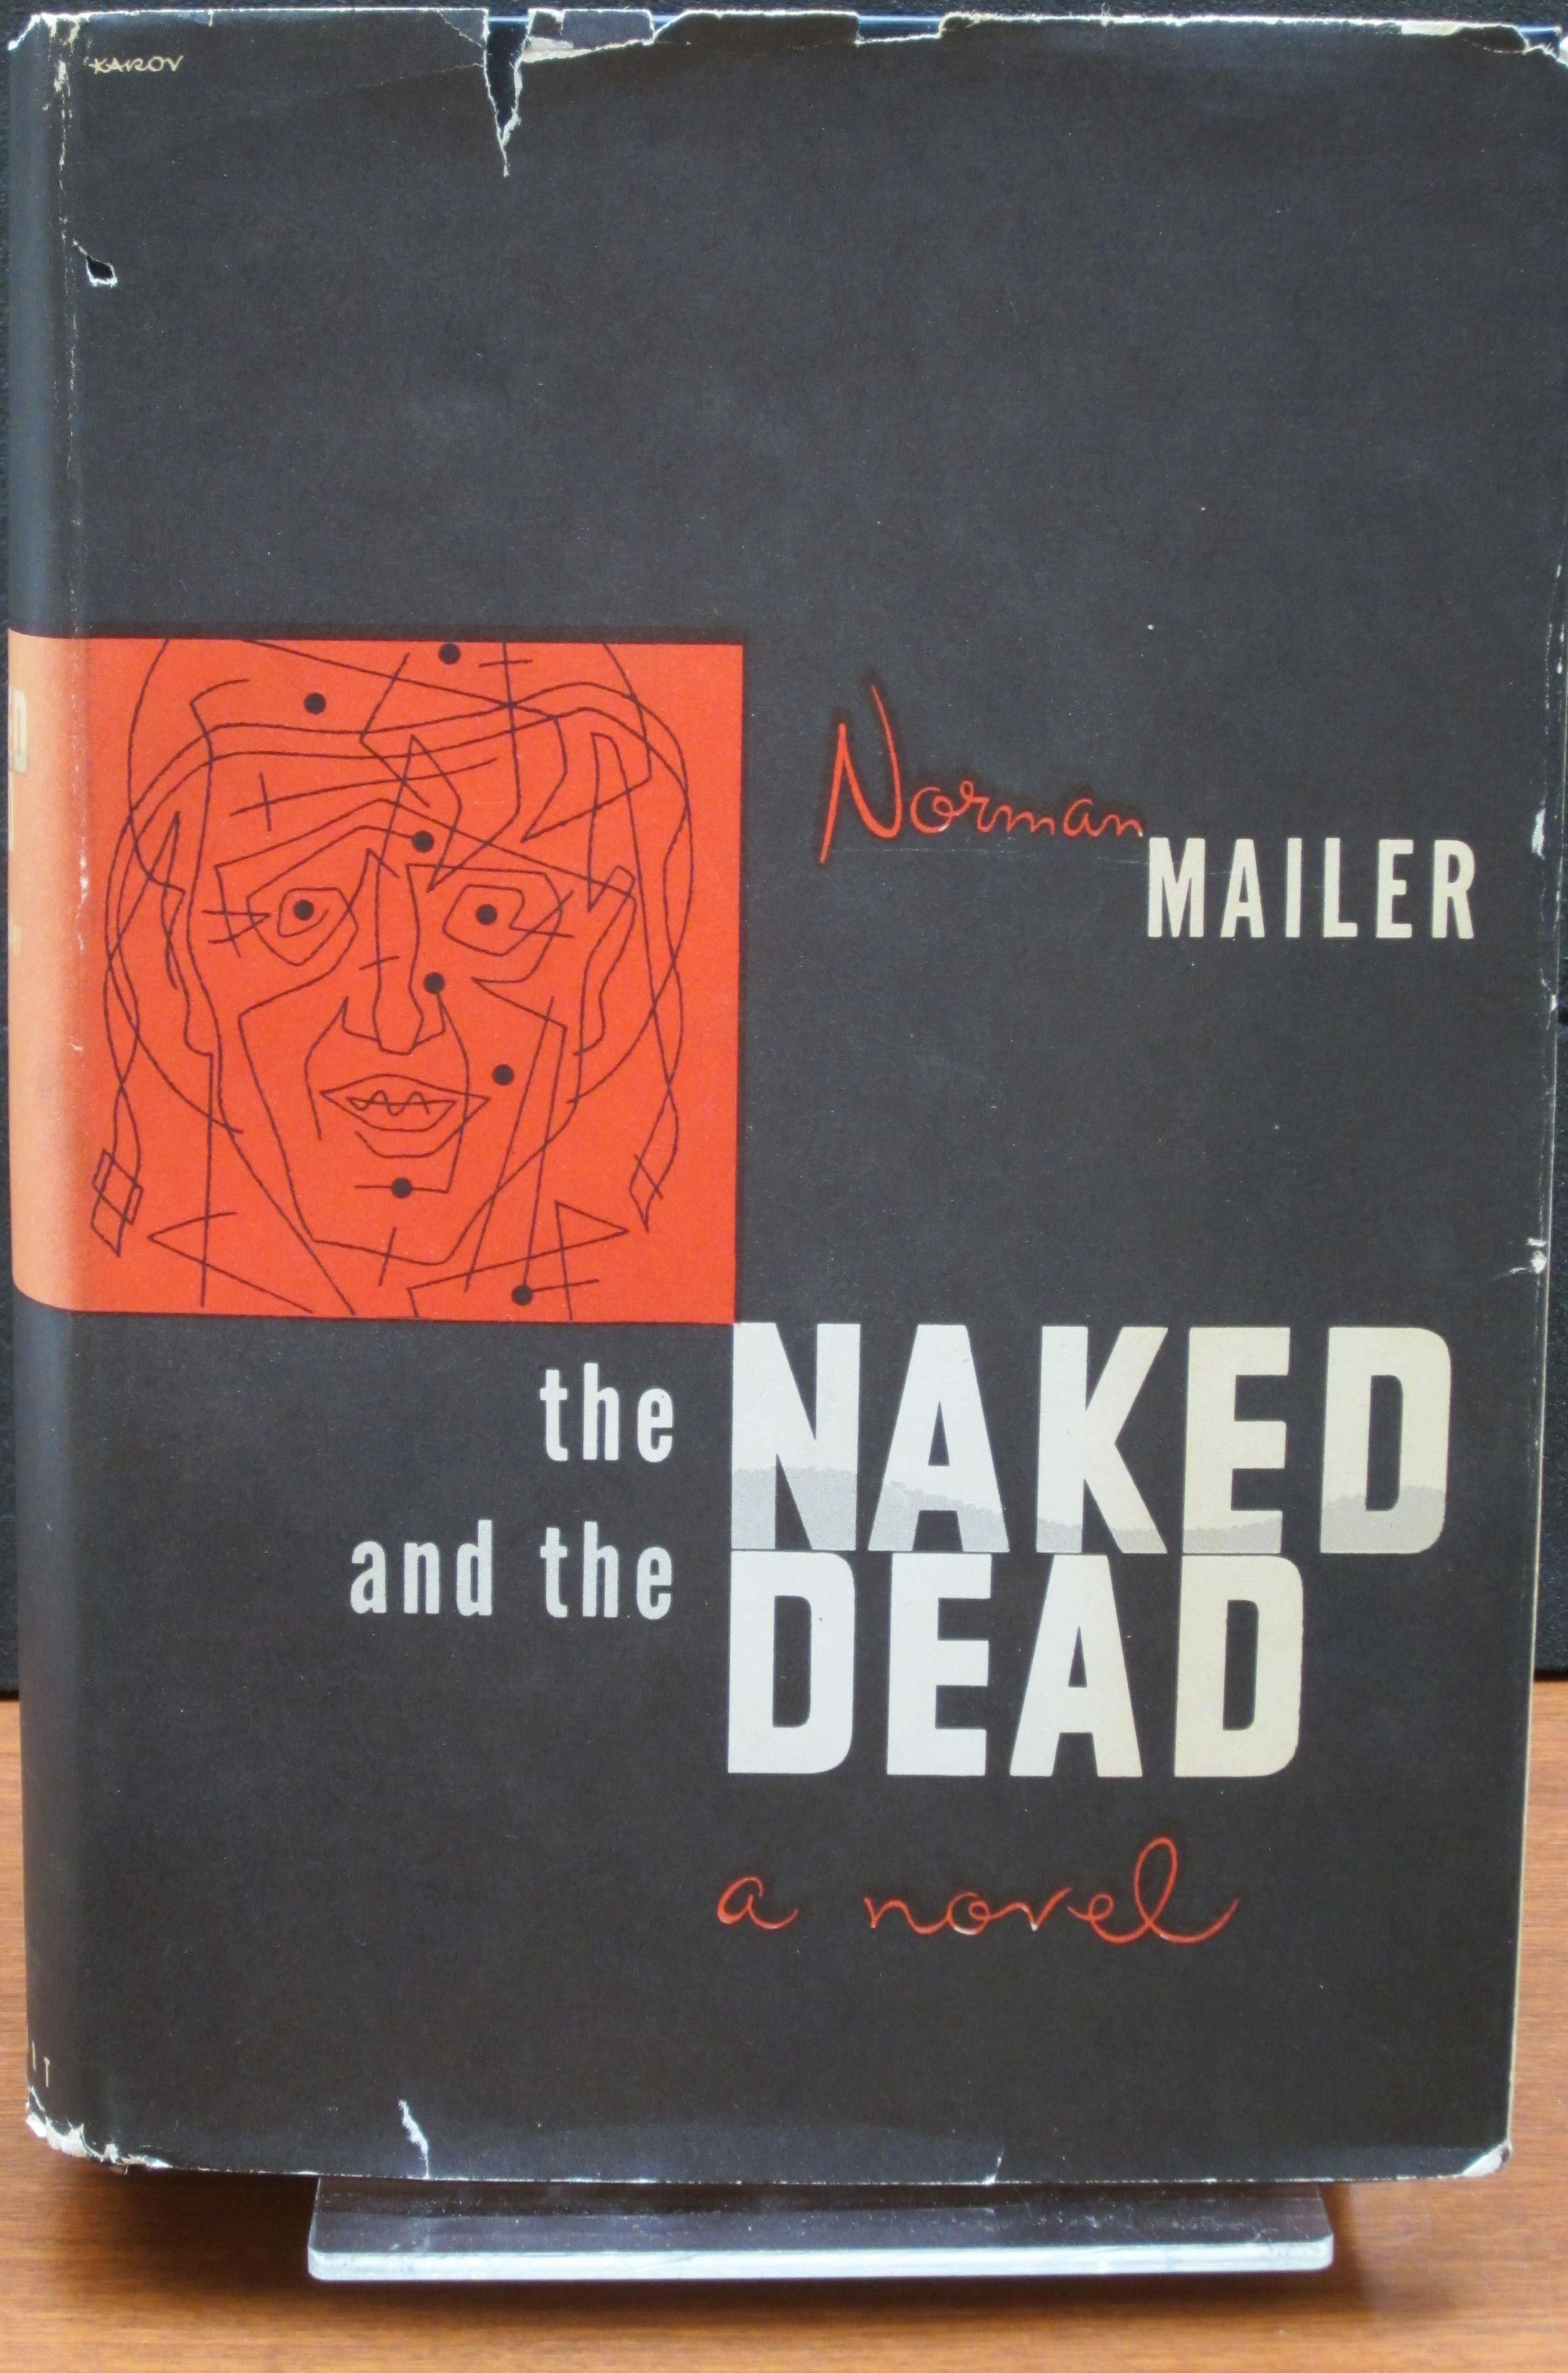 Cover of Norman Mailer's The Naked and the Dead, 1948.  The jacket design is by Karov. (PS 3525 .A4152 N3. Photograph by Petrina Jackson.)